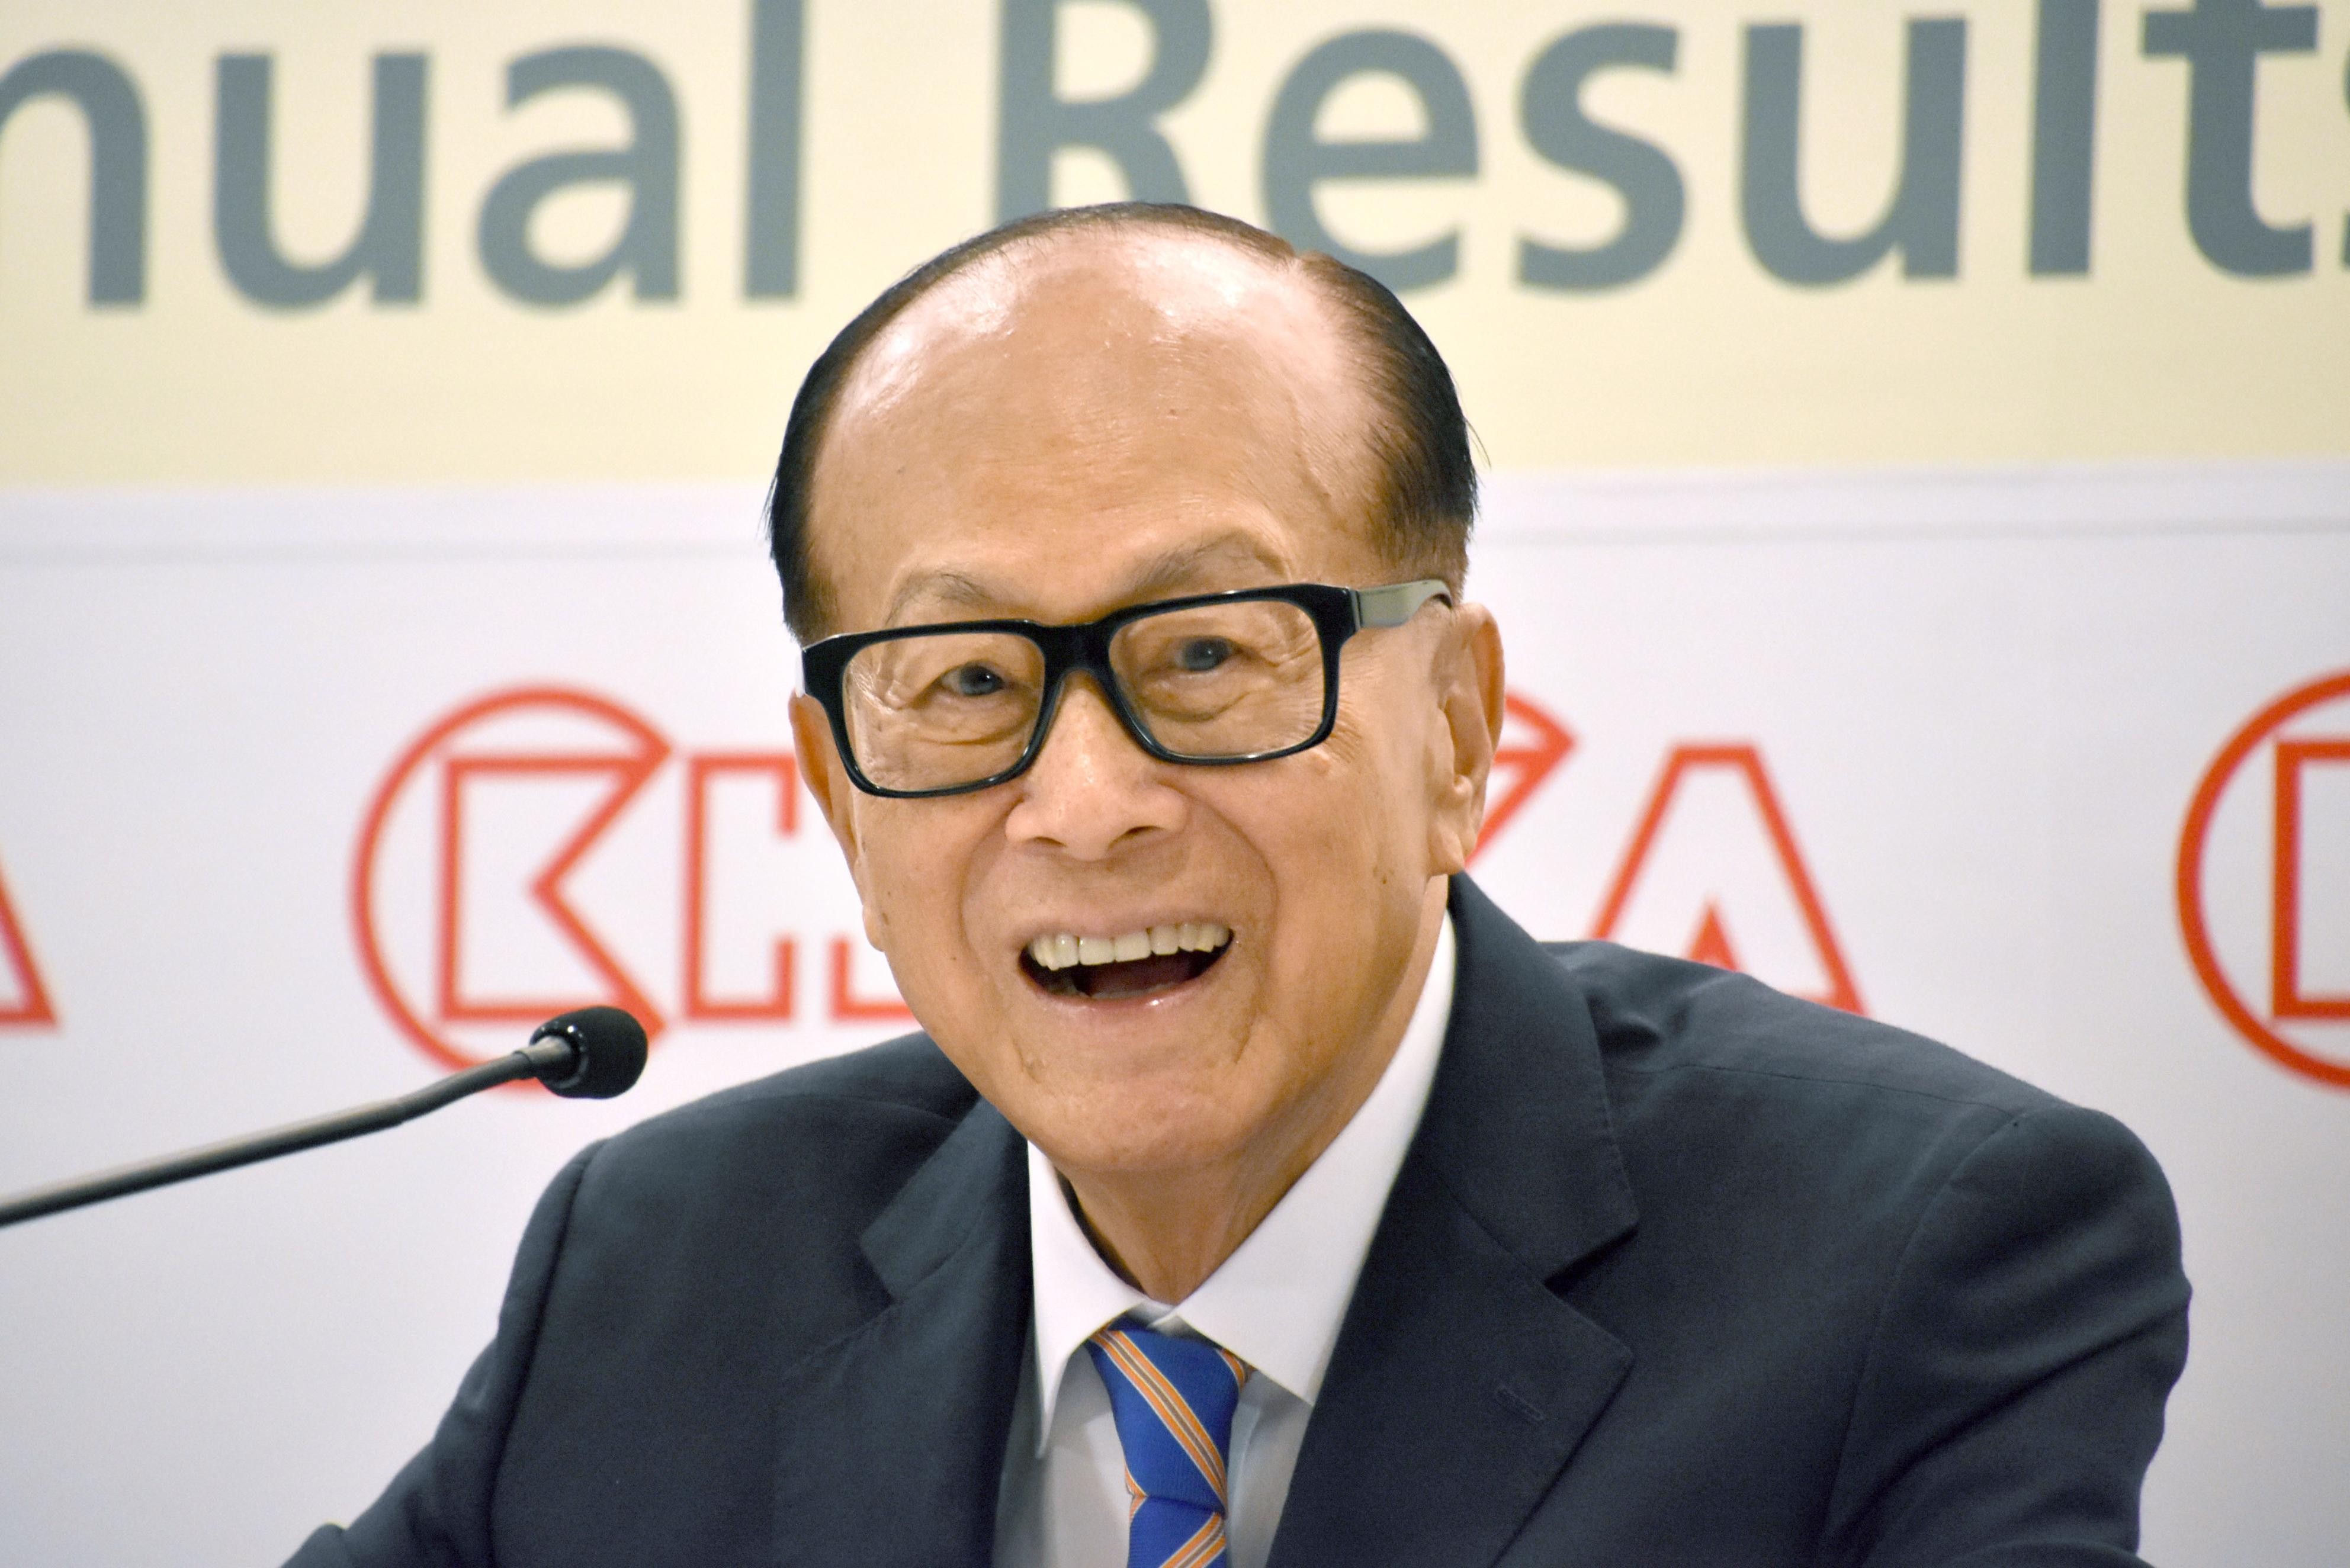 Li Ka-shing has announced he plans to step down as chairman and take up an advisory role at the flagship companies he controls, CK Hutchison Holdings and CK Asset Holdings. Photo: Kyodo